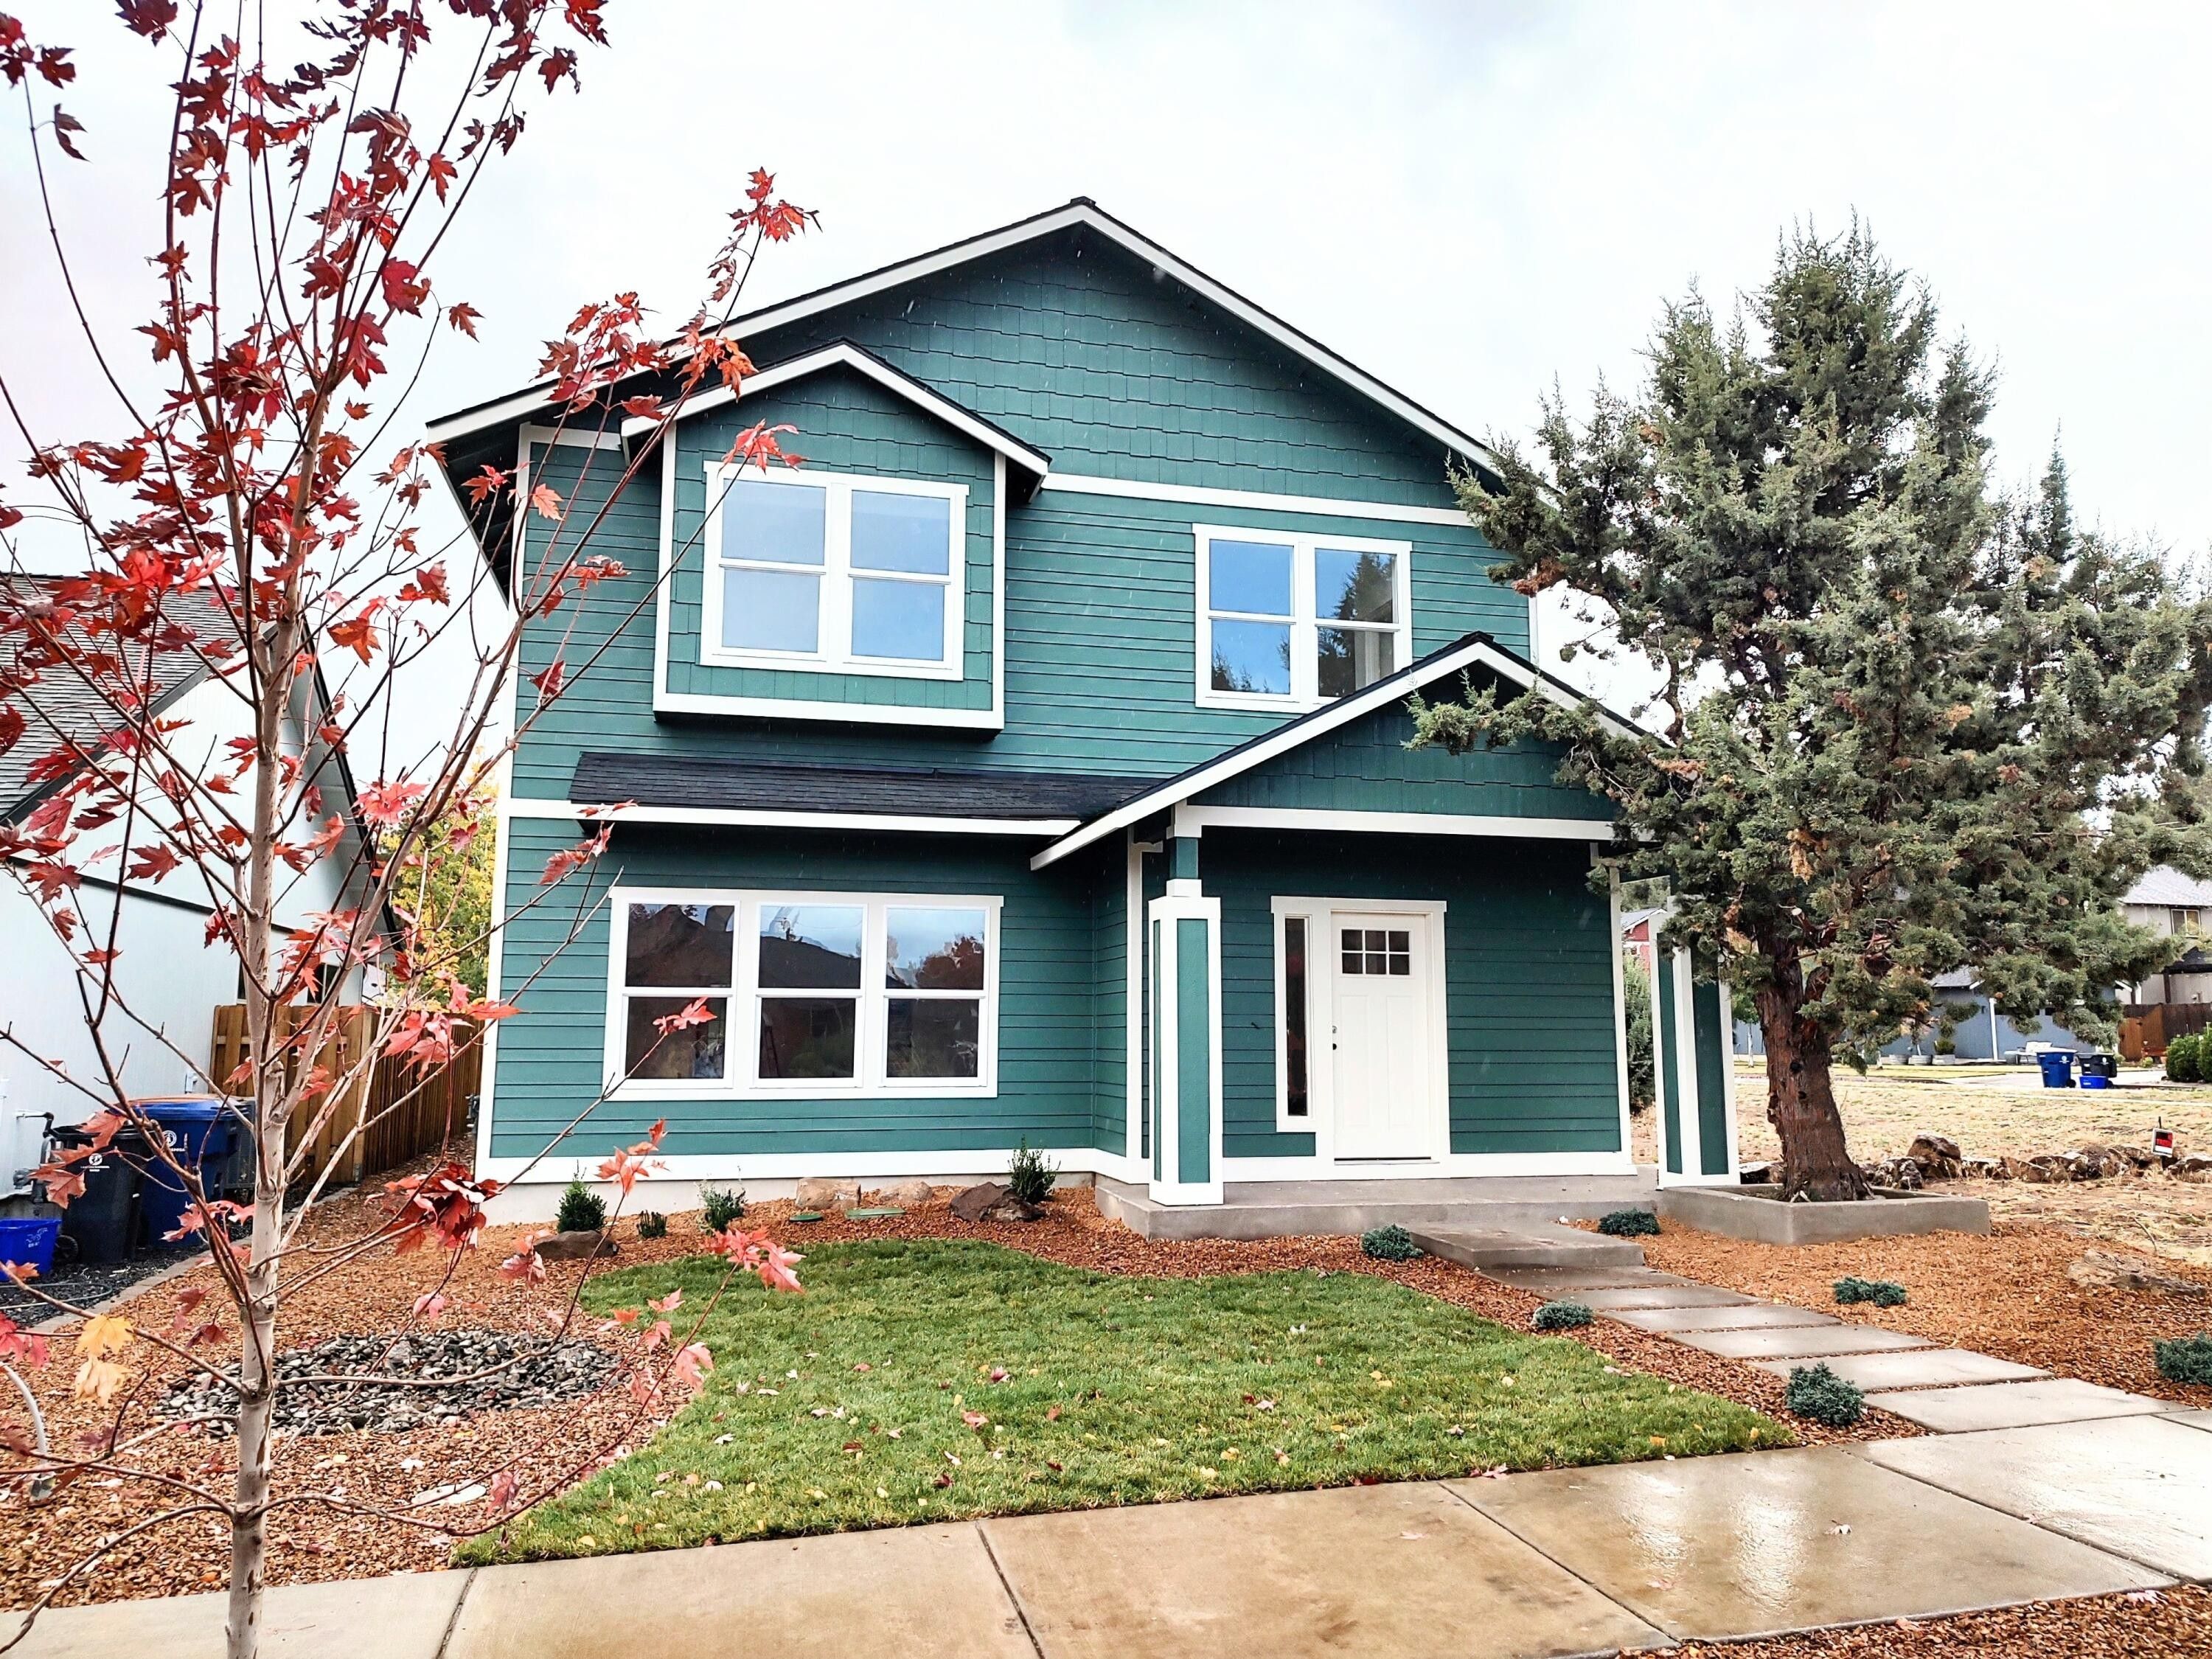 20013 Voltera Place. Bend, OR 97702